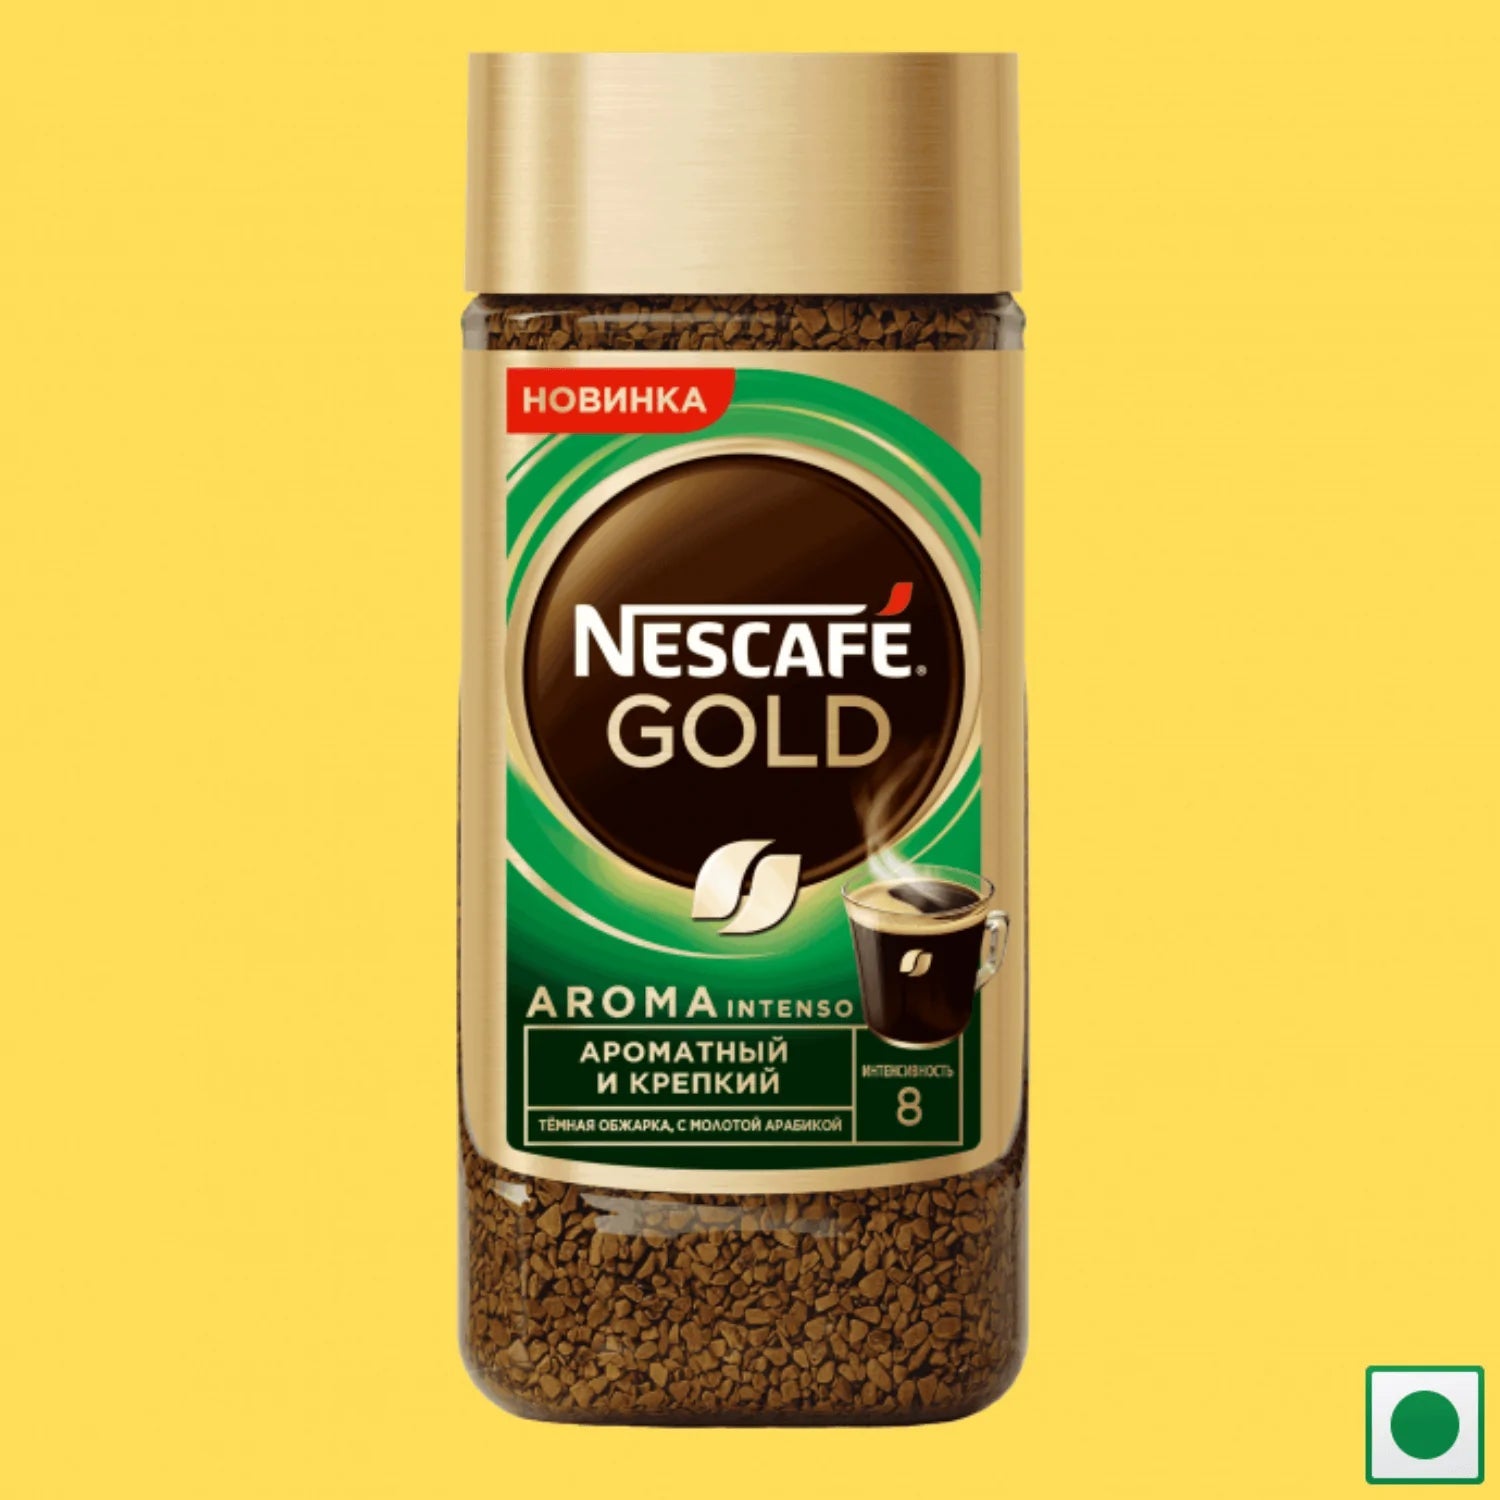 Nescafe Gold Aroma Intenso, 85g (Imported) - Super 7 Mart